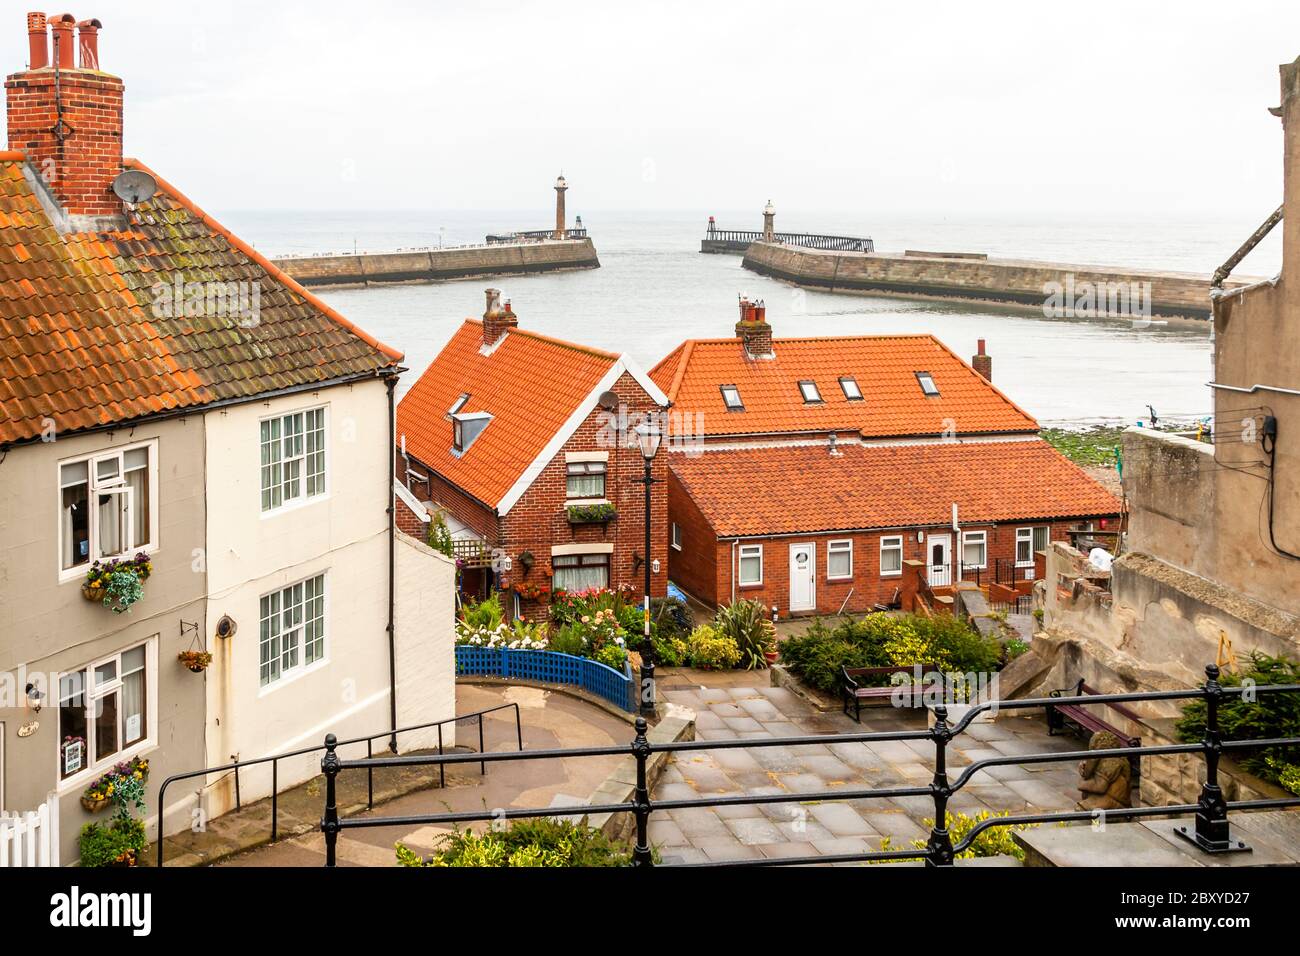 View of the harbor from the town of Whitby, Scarborough, England Stock Photo